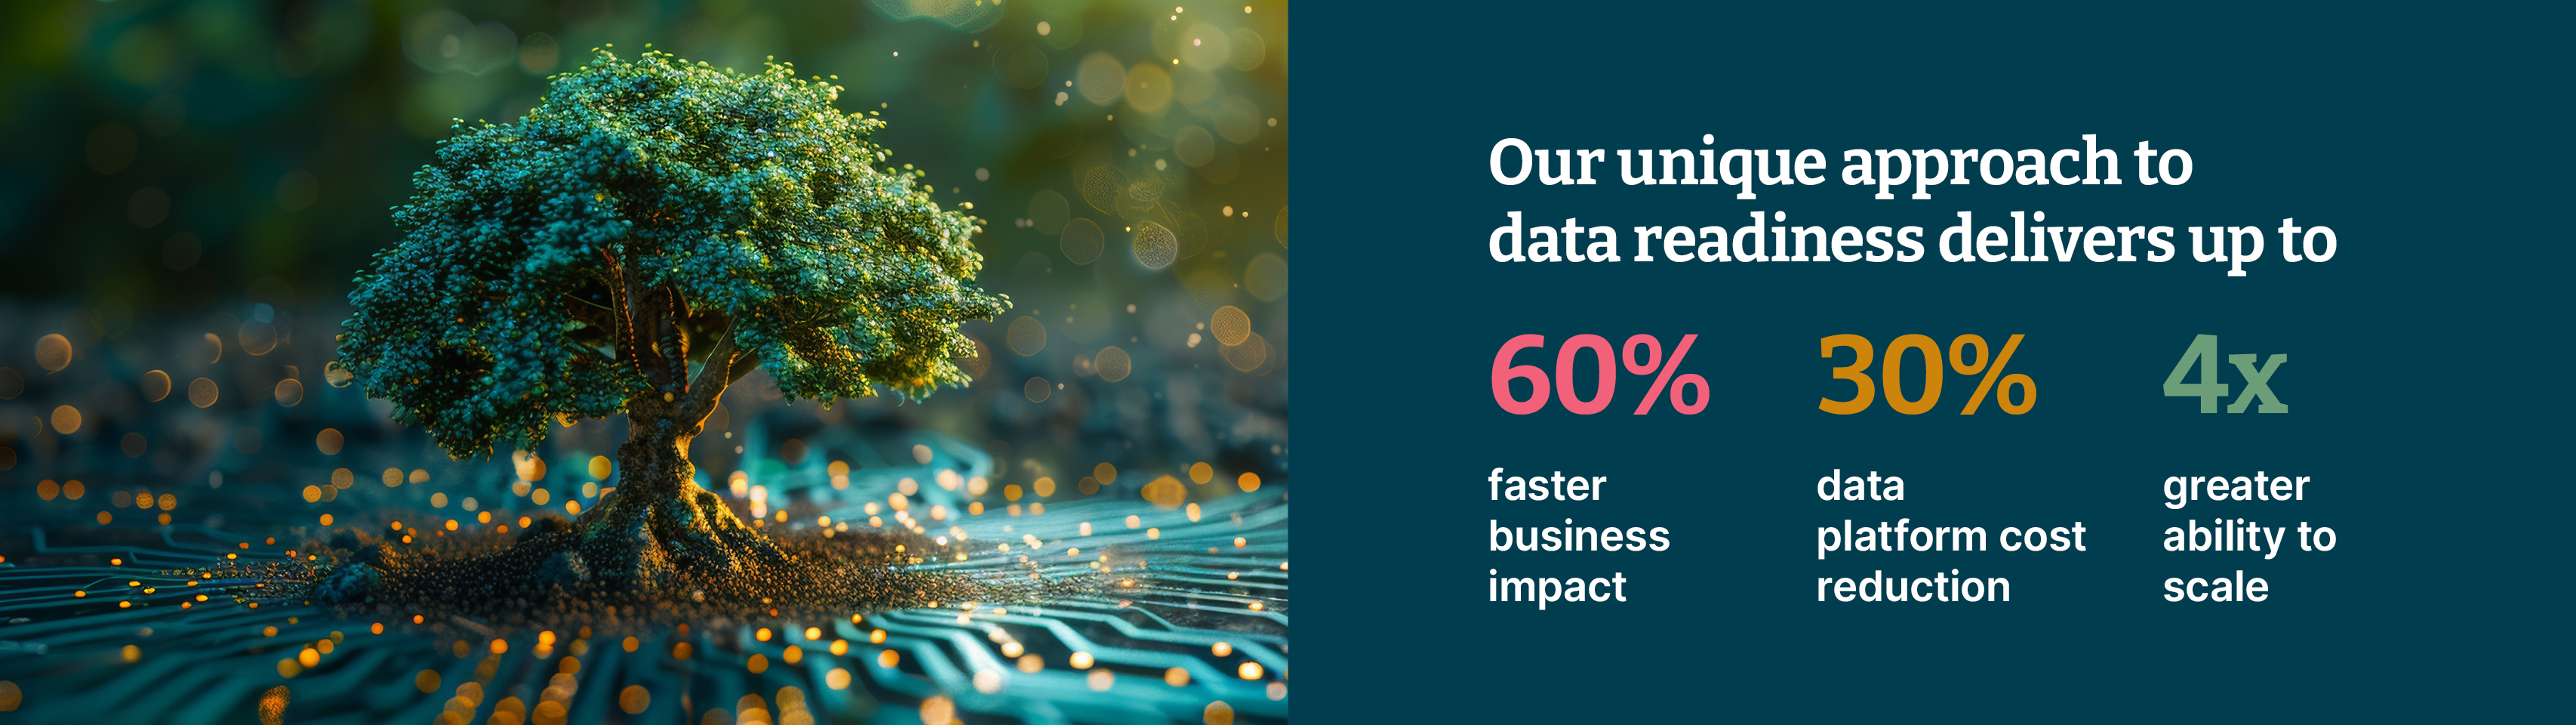  AI generated image  of tree growing out of the digital data and our unique approach to data readiness delivers up to:  1) 60% faster business impact 2) 4x greater ability to scale 3) 30% data platform cost reduction. 